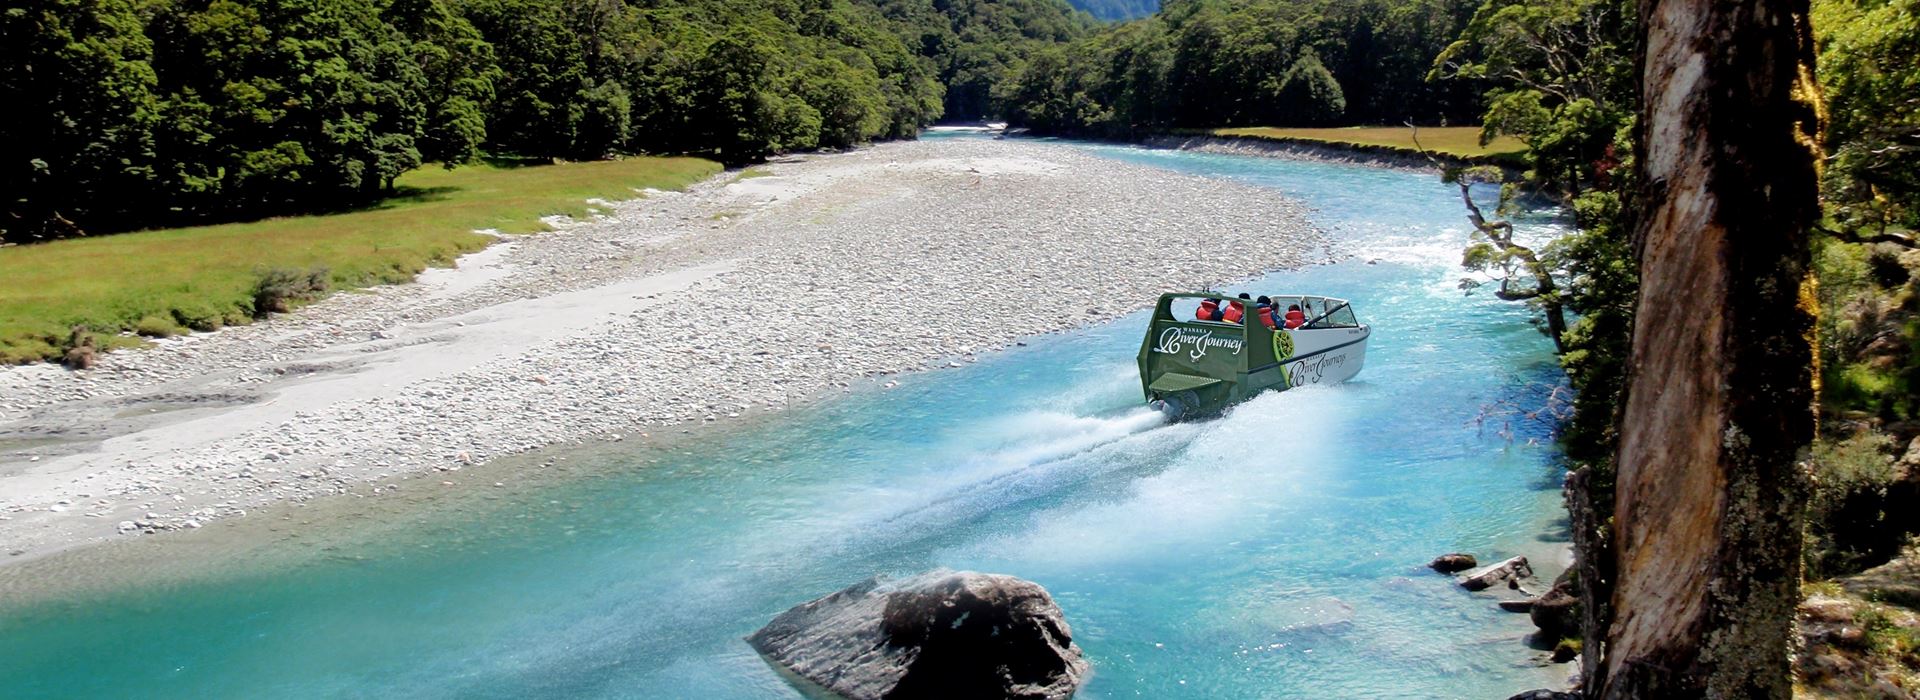 12 Day -  Family Fun in North & South Island of New Zealand